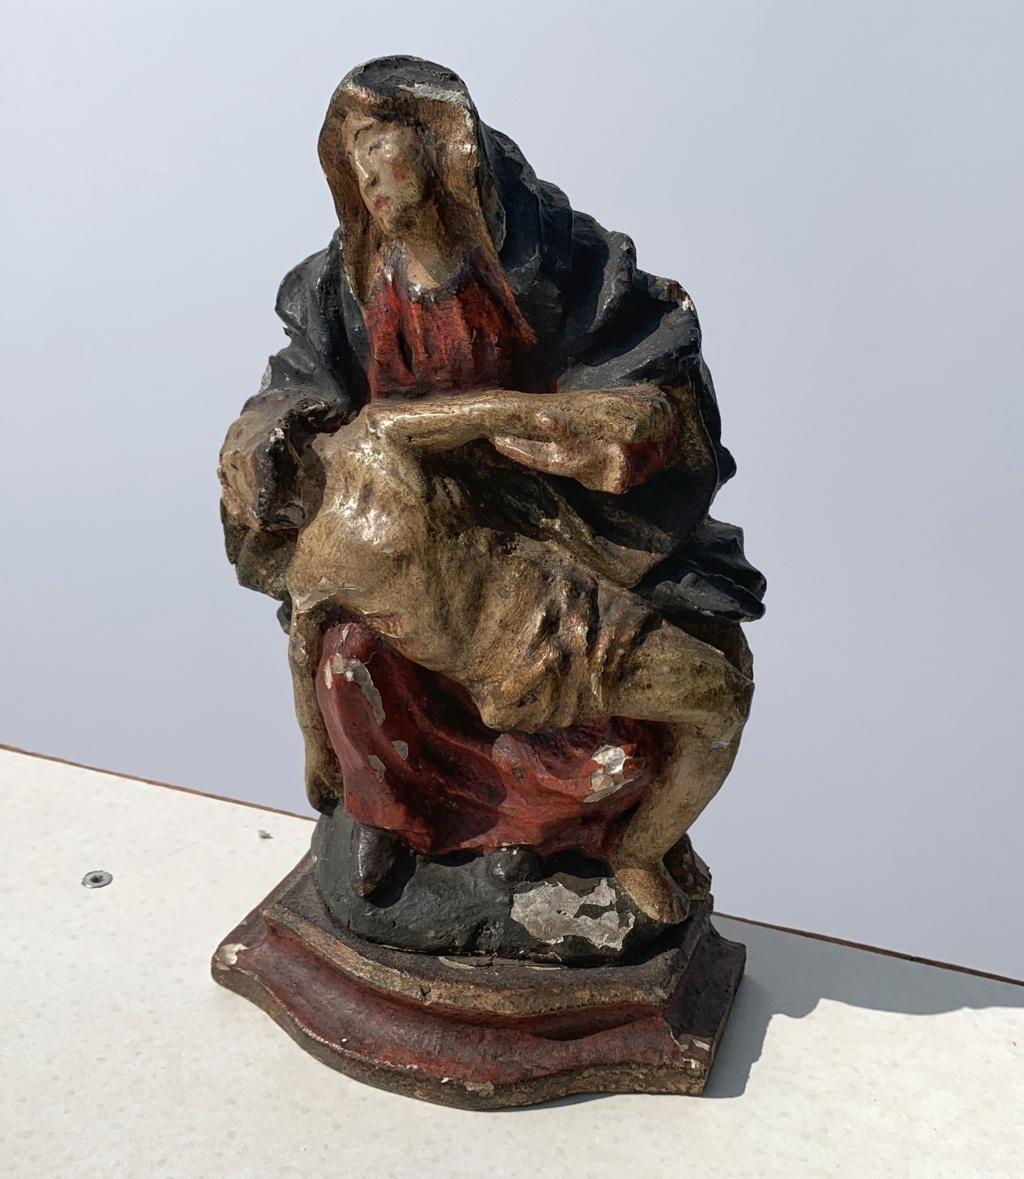 Italian master - 18th century figure sculpture - Virgin Pity - Carved Wood Paint - Old Masters Sculpture by Unknown